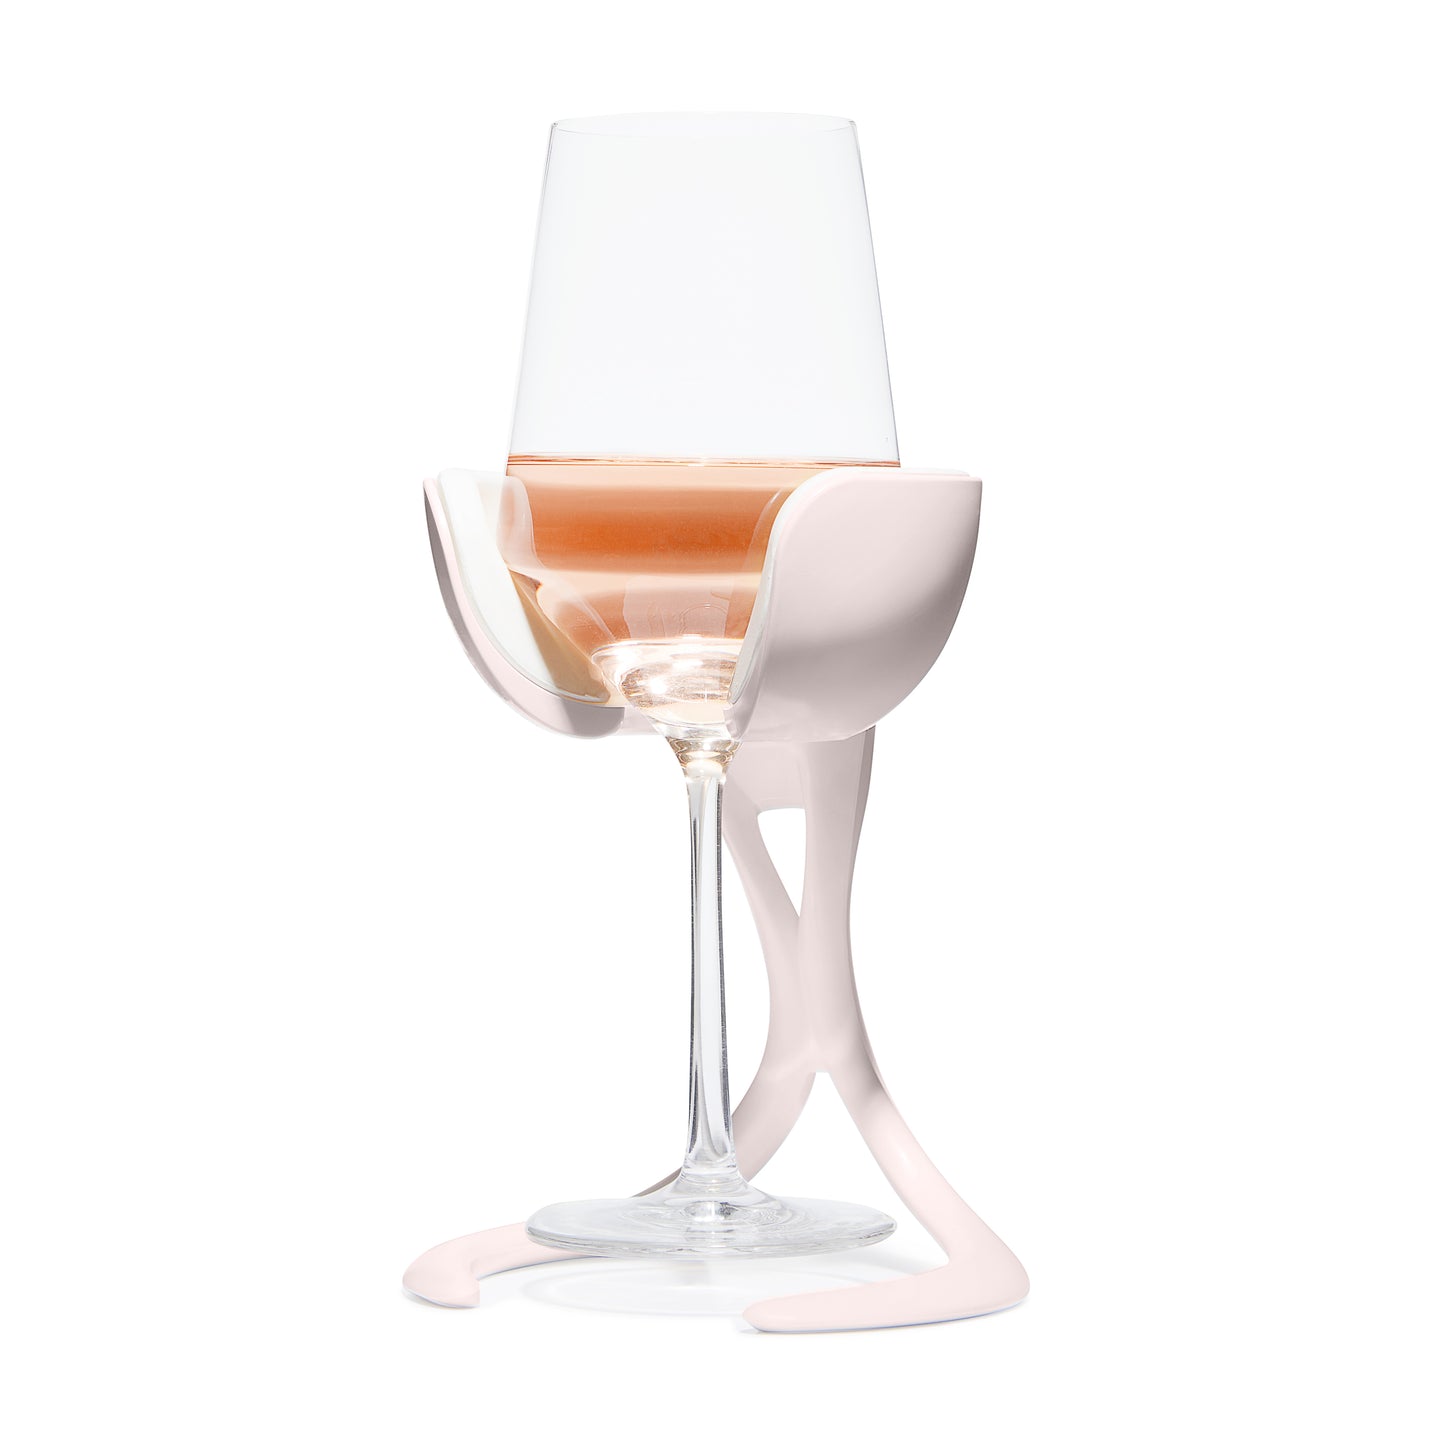 Blush color stemmed wine glass chiller on white background by VoChill Inc.